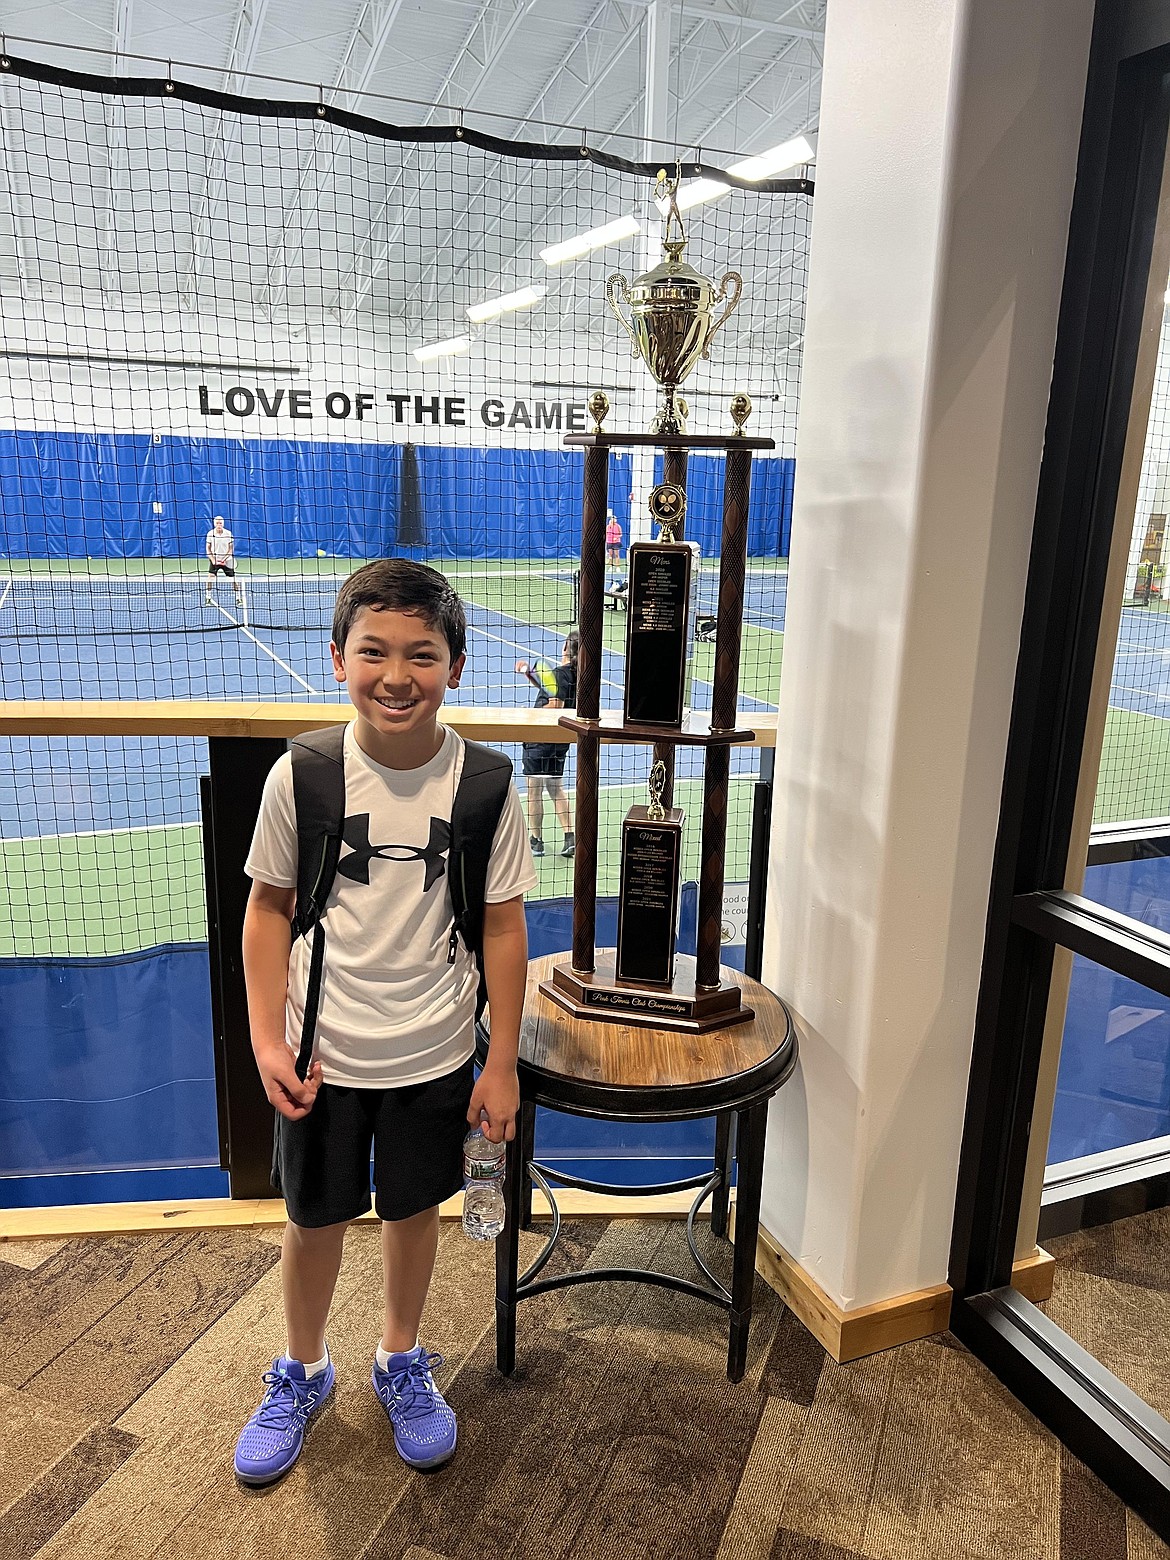 Courtesy photo
The high school singles champion at the recent Peak Hayden member tennis tournament was Nathan Freedman, who defeated Kolby Johnson 6-4, 6-4.